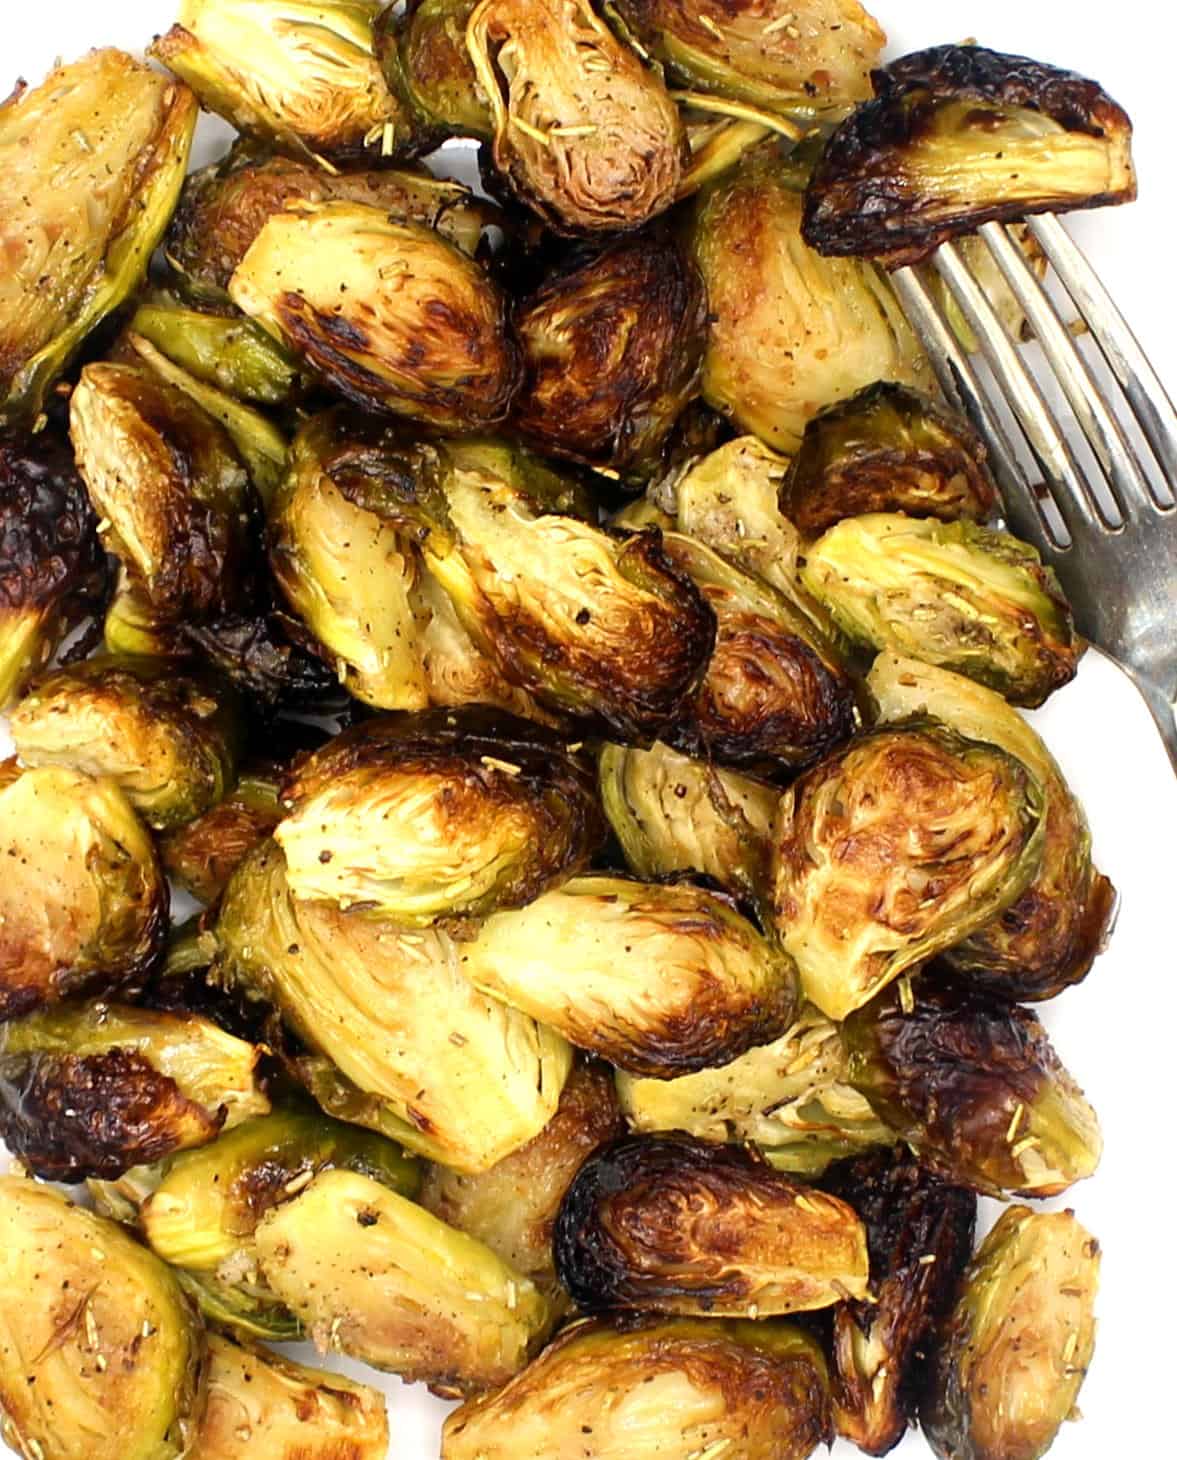 Perfectly roasted Brussels sprouts on white plate with fork.